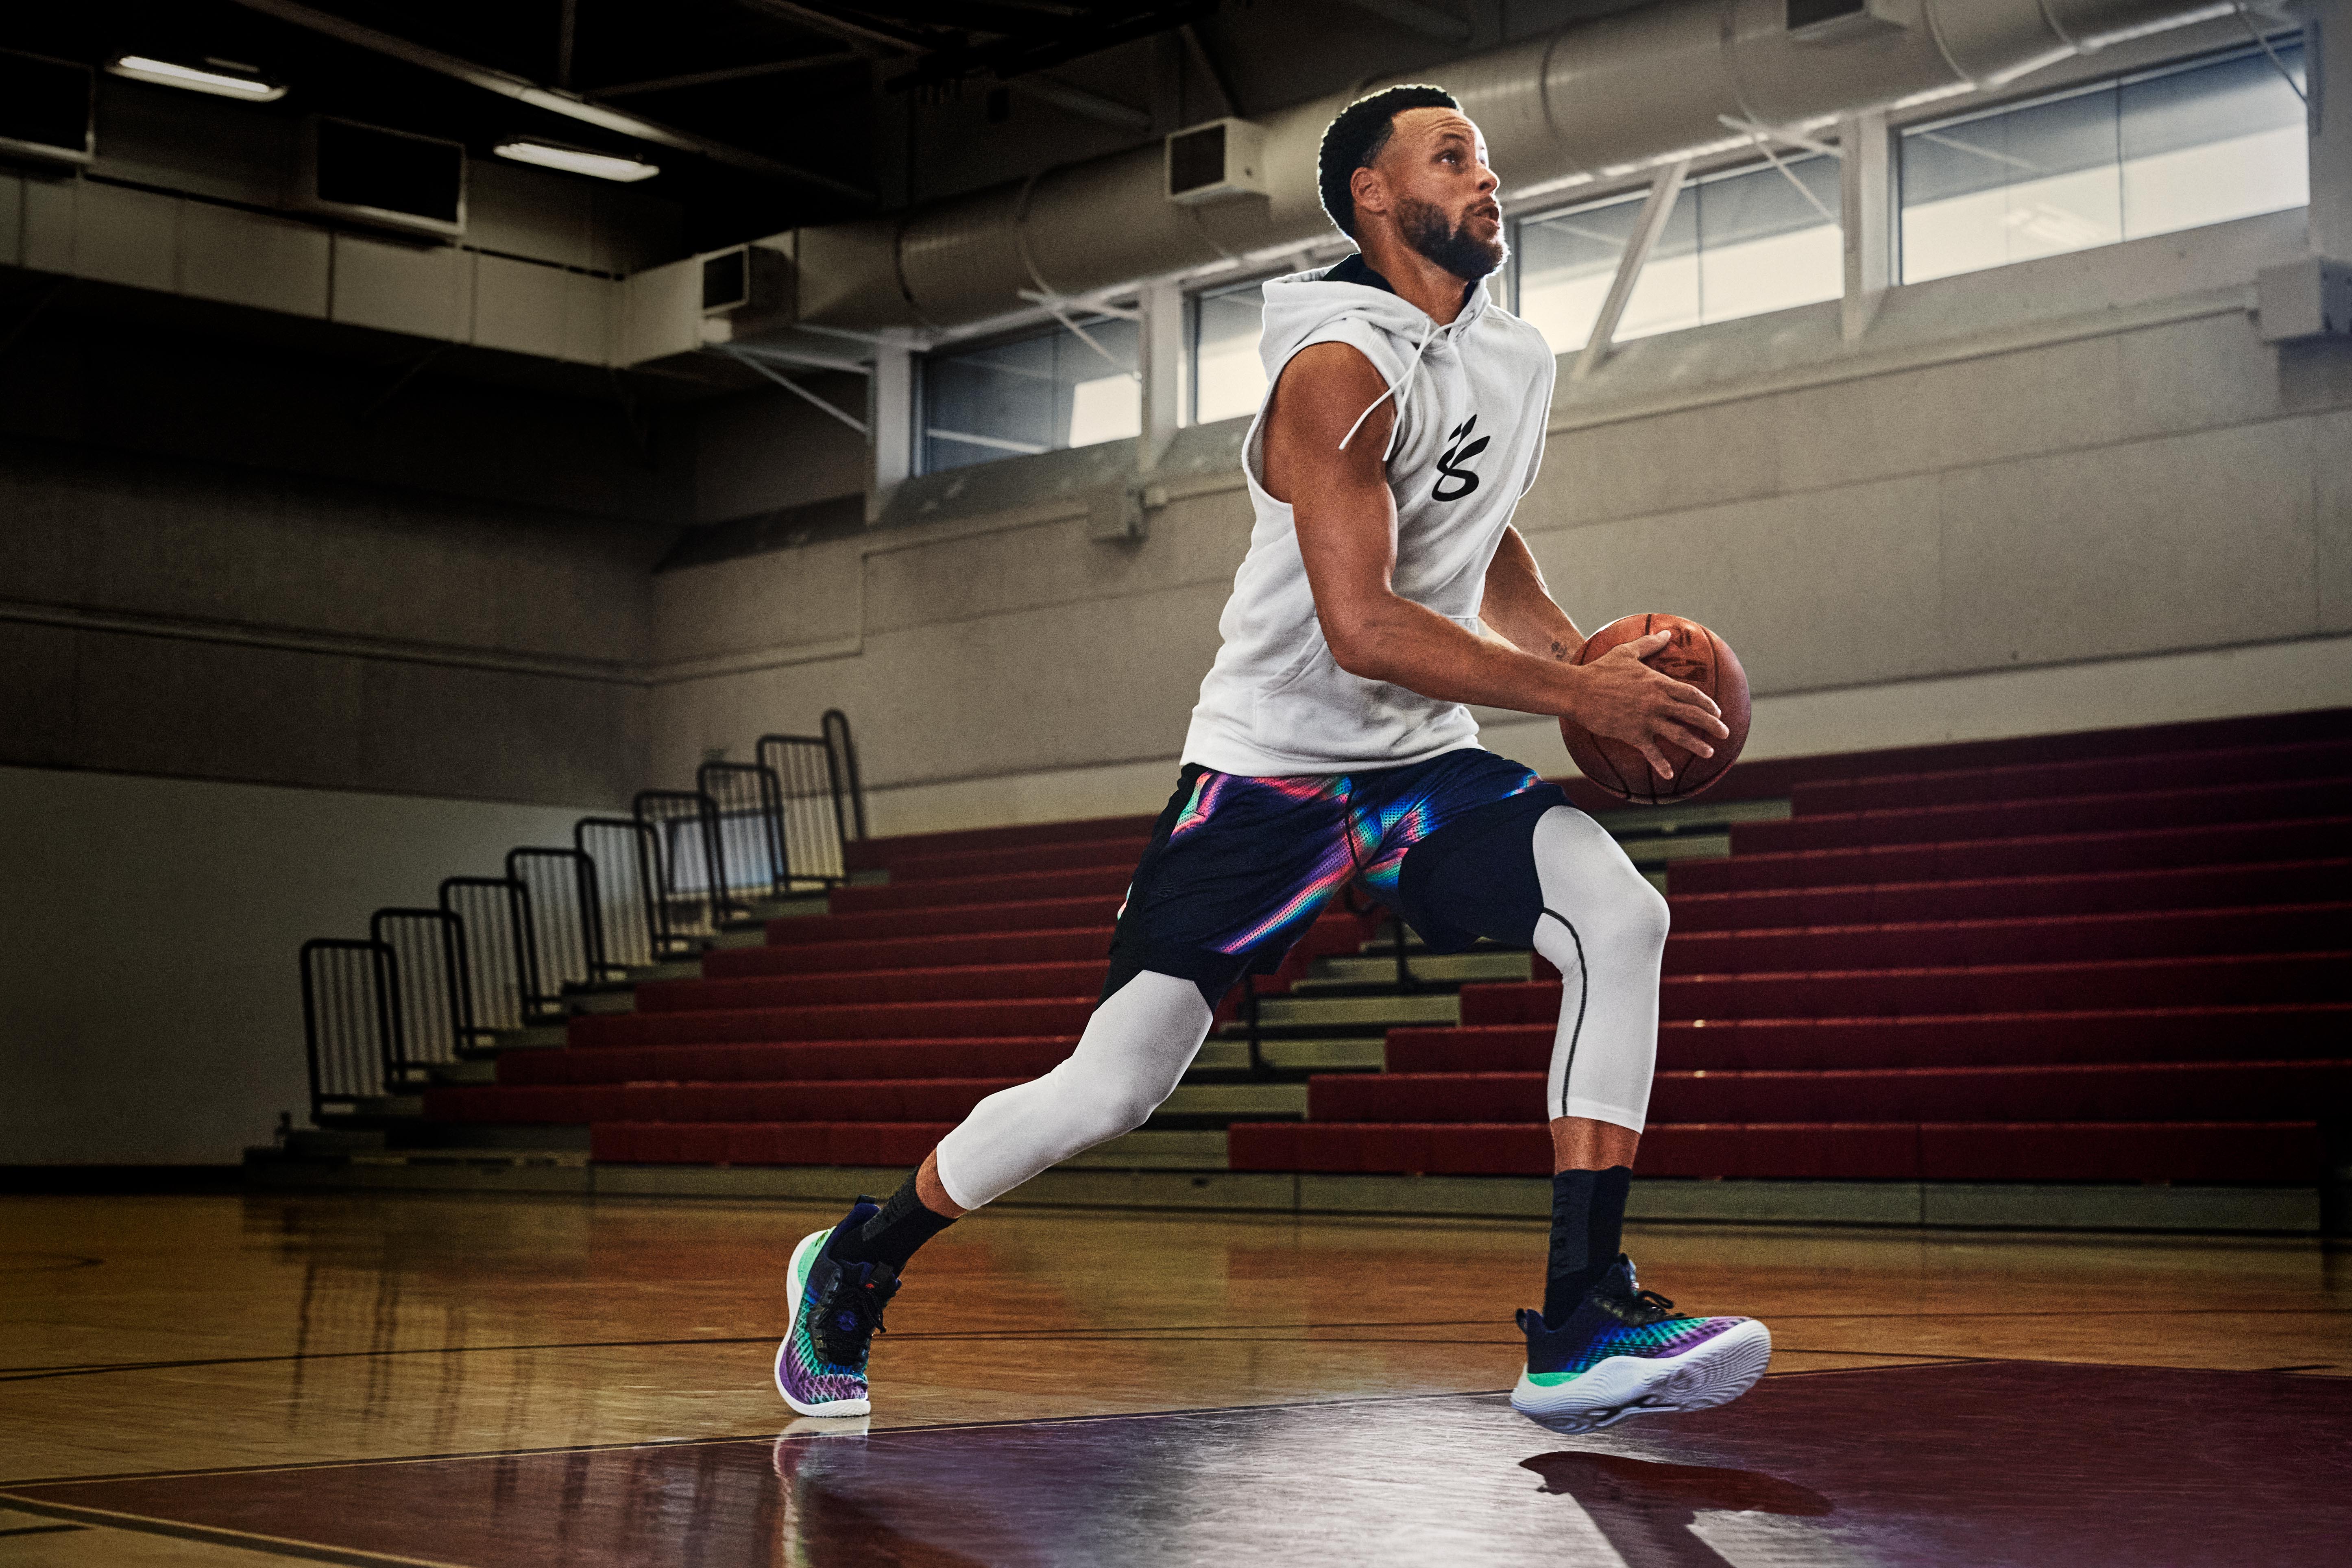 Can These New Curry 6 Shoes Improve Your Game: A Shocking Look At Steph